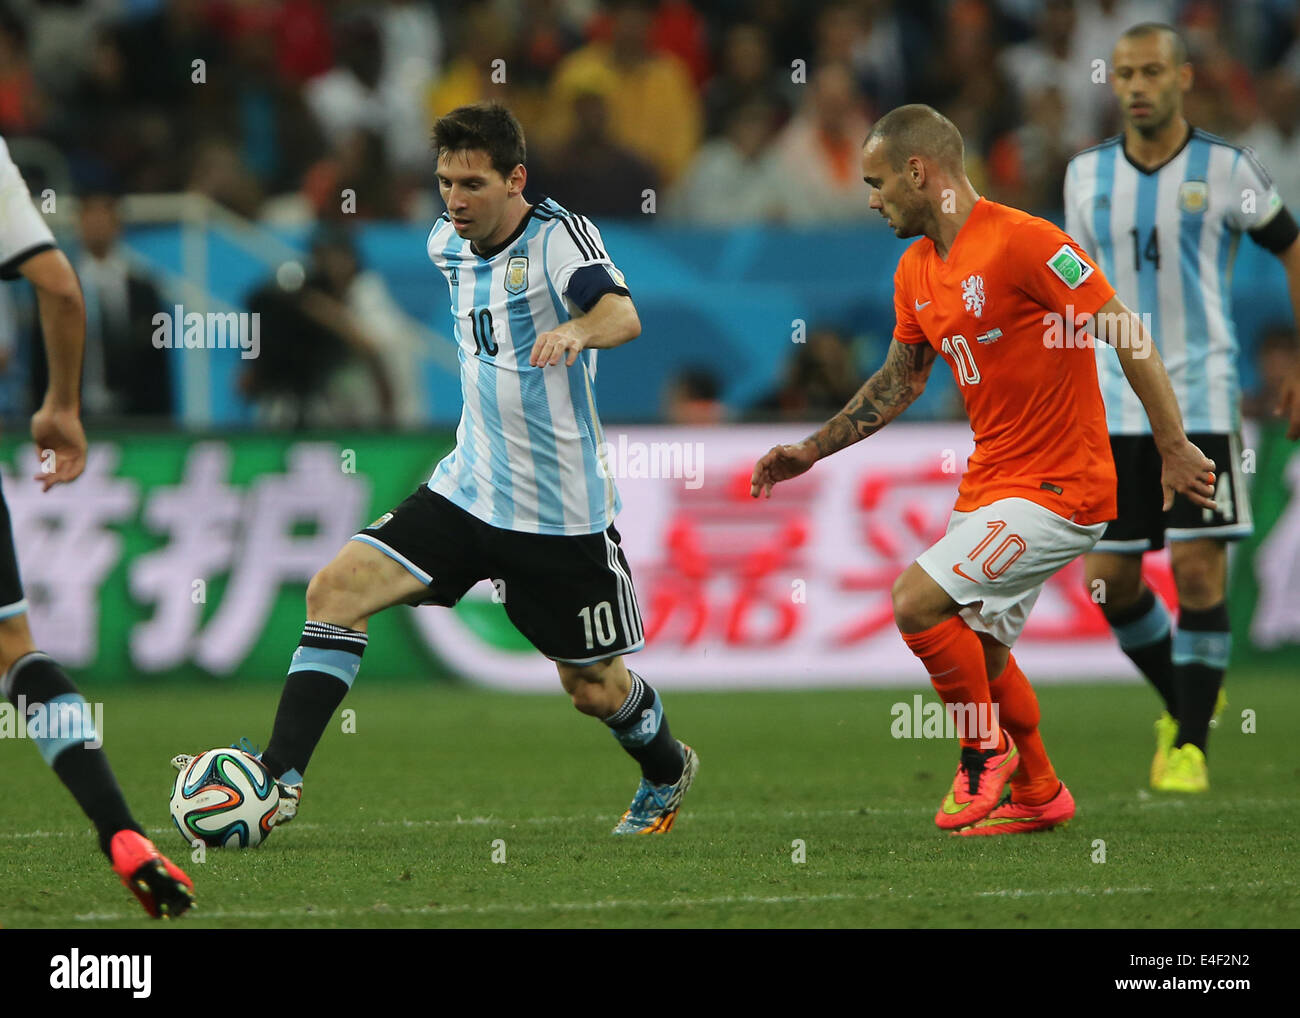 Sao Paulo, Brazil. 9th July, 2014. Netherlands' Wesley Sneijder vies with Argentina's Lionel Messi during a semifinal match between Netherlands and Argentina of 2014 FIFA World Cup at the Arena de Sao Paulo Stadium in Sao Paulo, Brazil, on July 9, 2014. Credit:  Xu Zijian/Xinhua/Alamy Live News Stock Photo